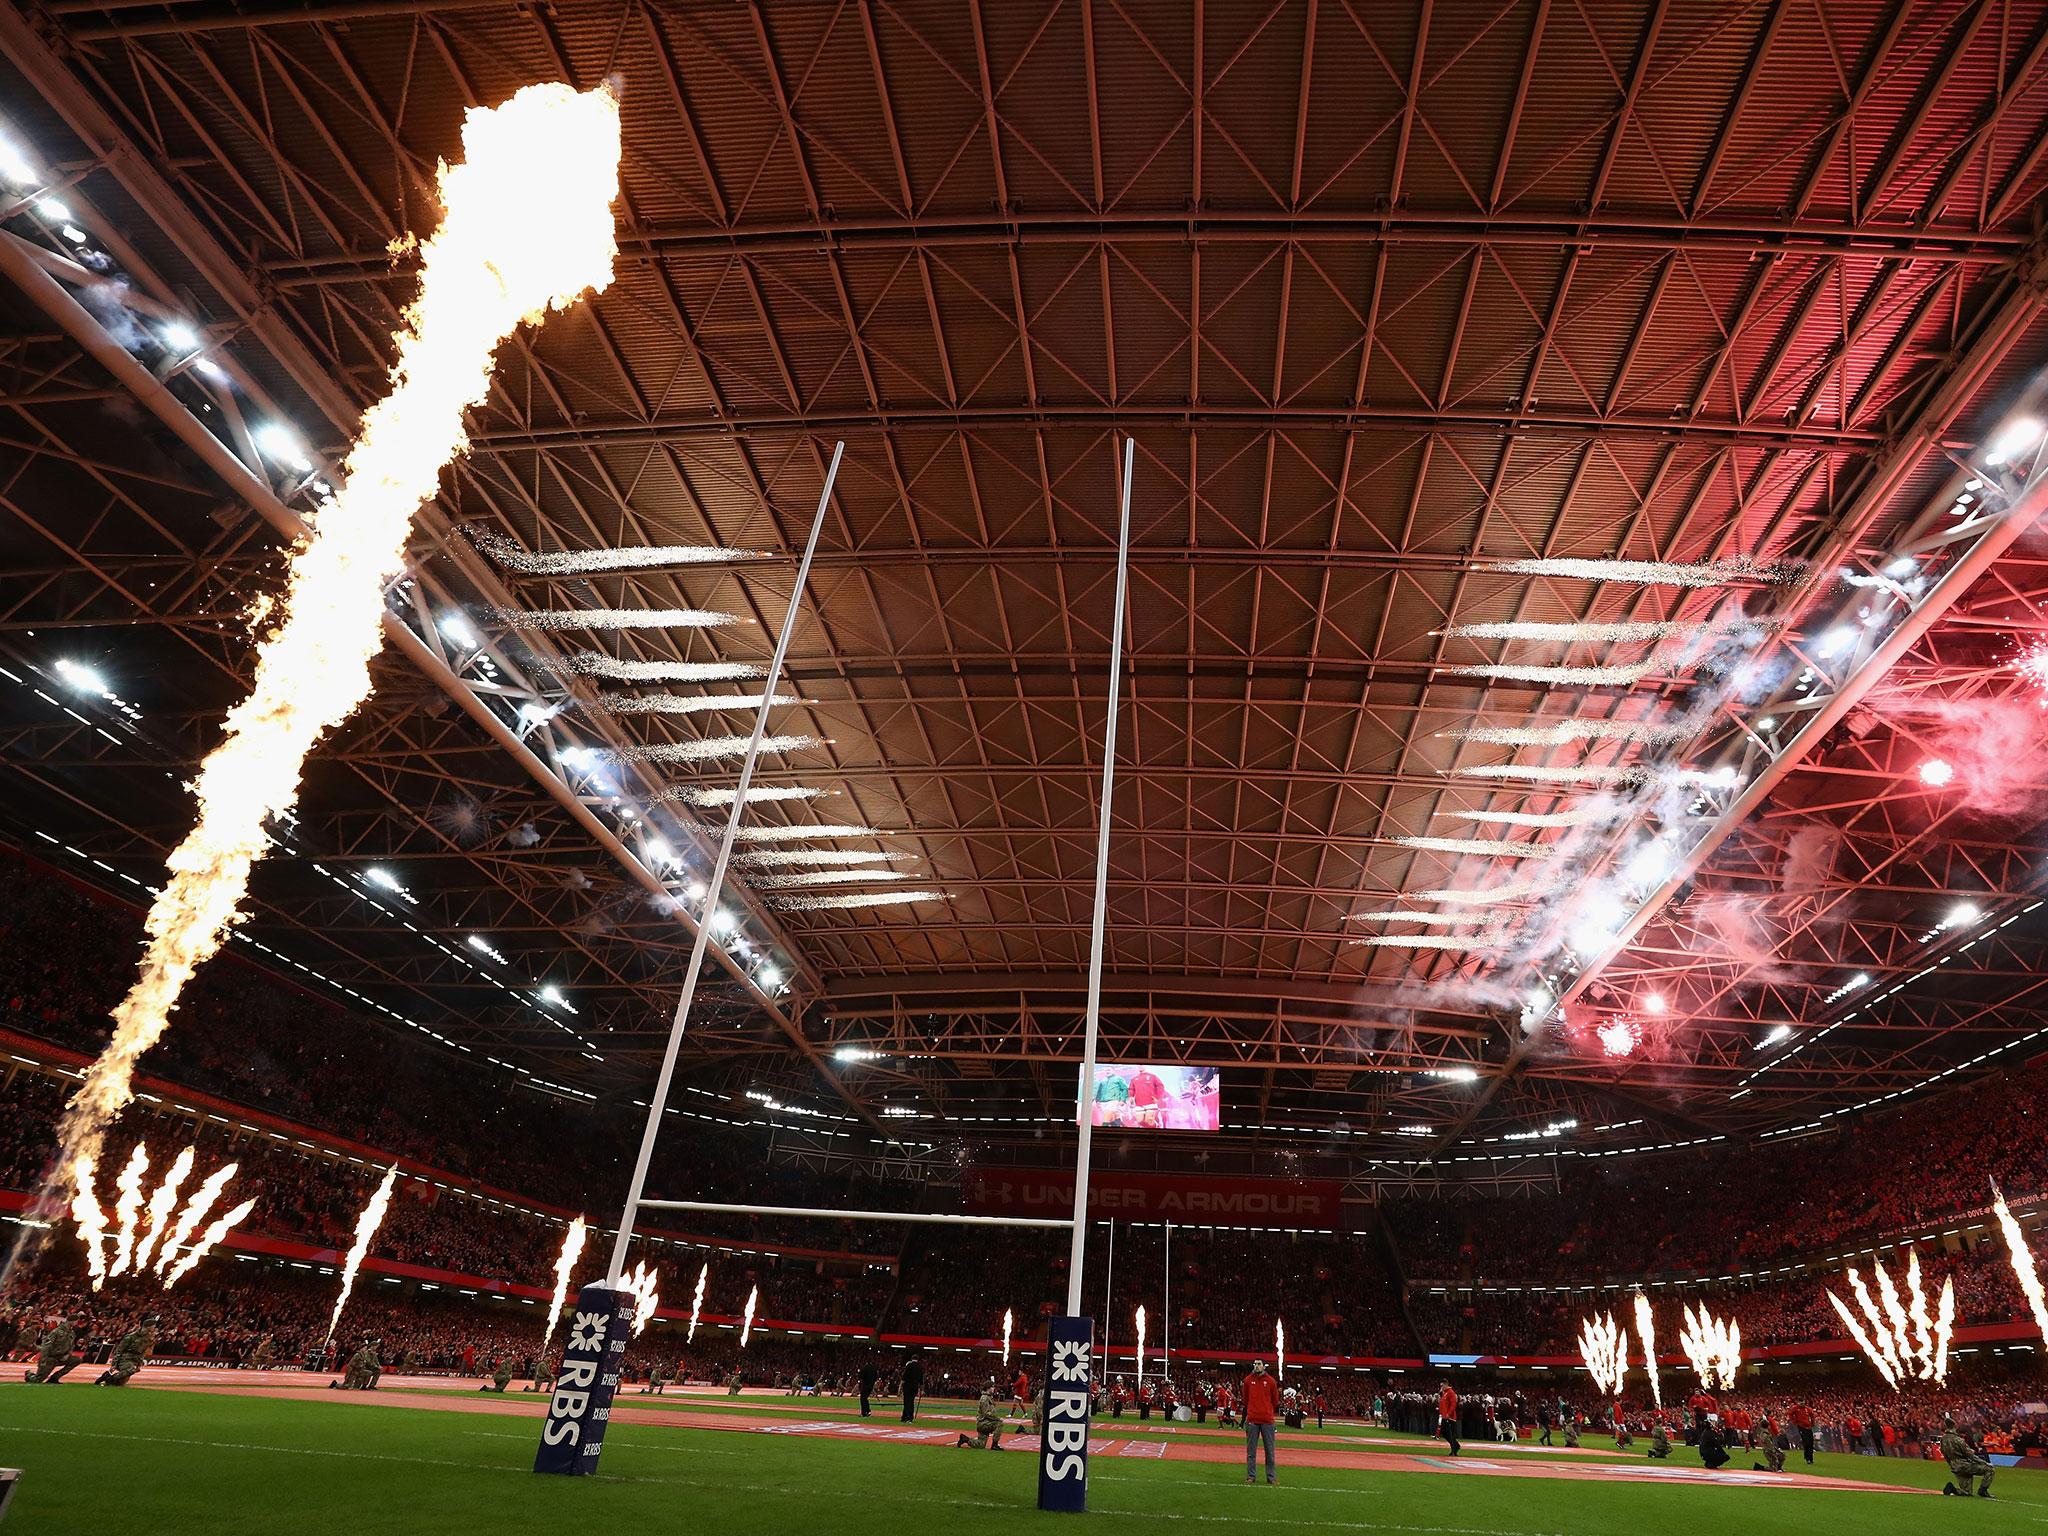 The stadium has staged rugby matches with the roof closed but it would be a first for football